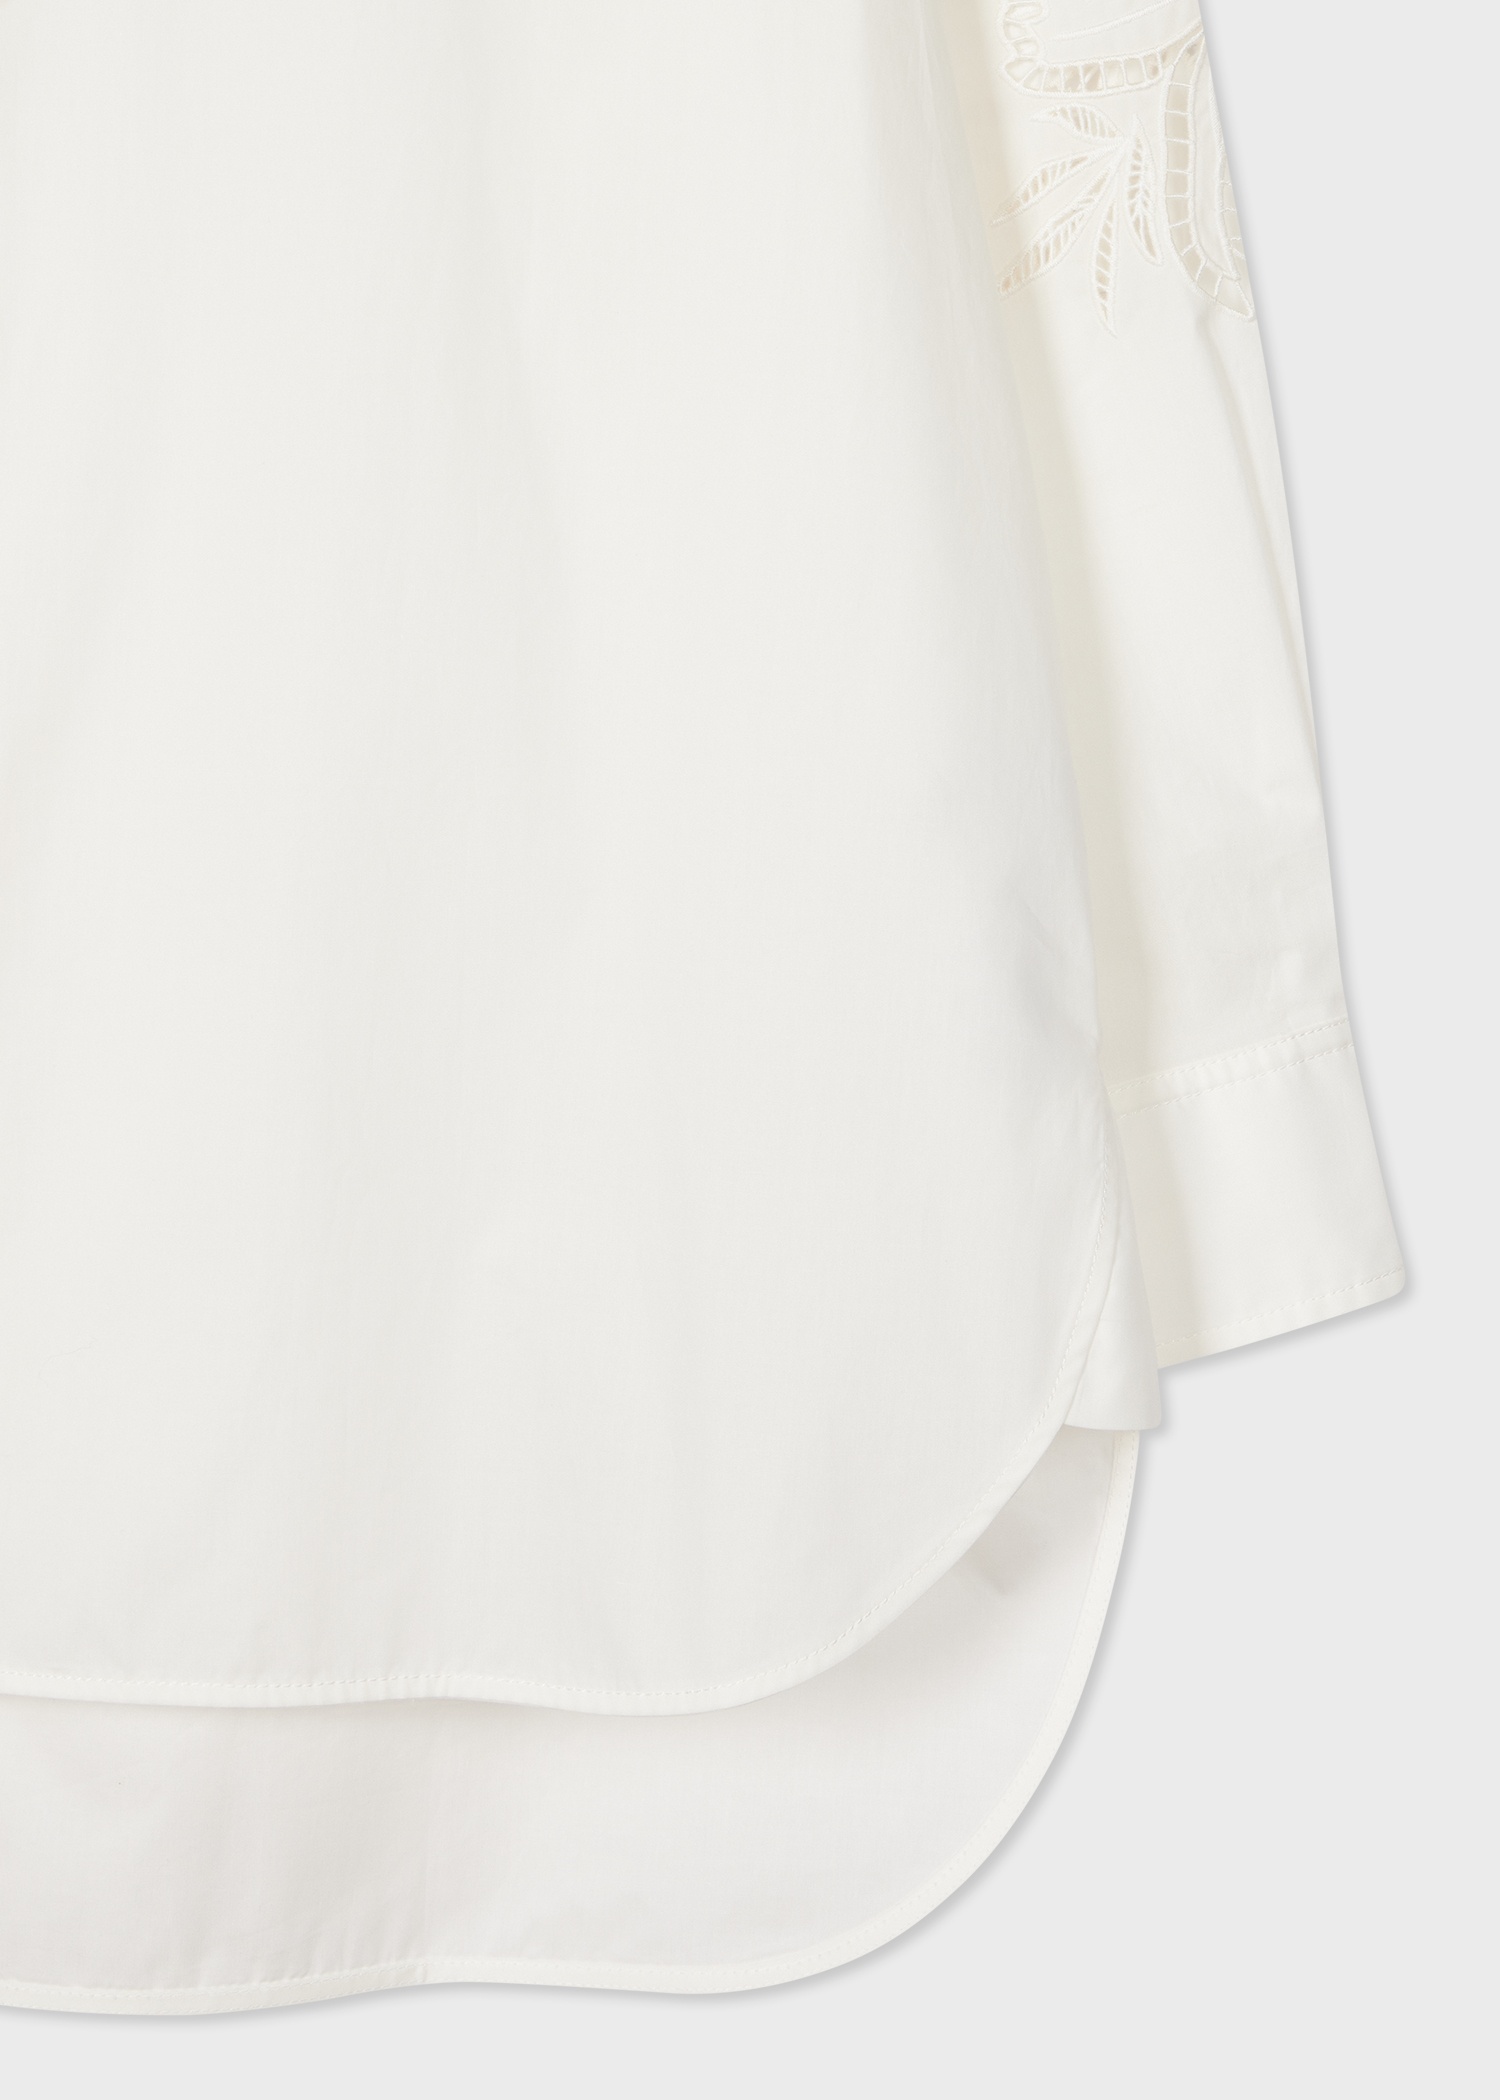 Women's White Cotton Shirt with Cutout Sleeves - 2